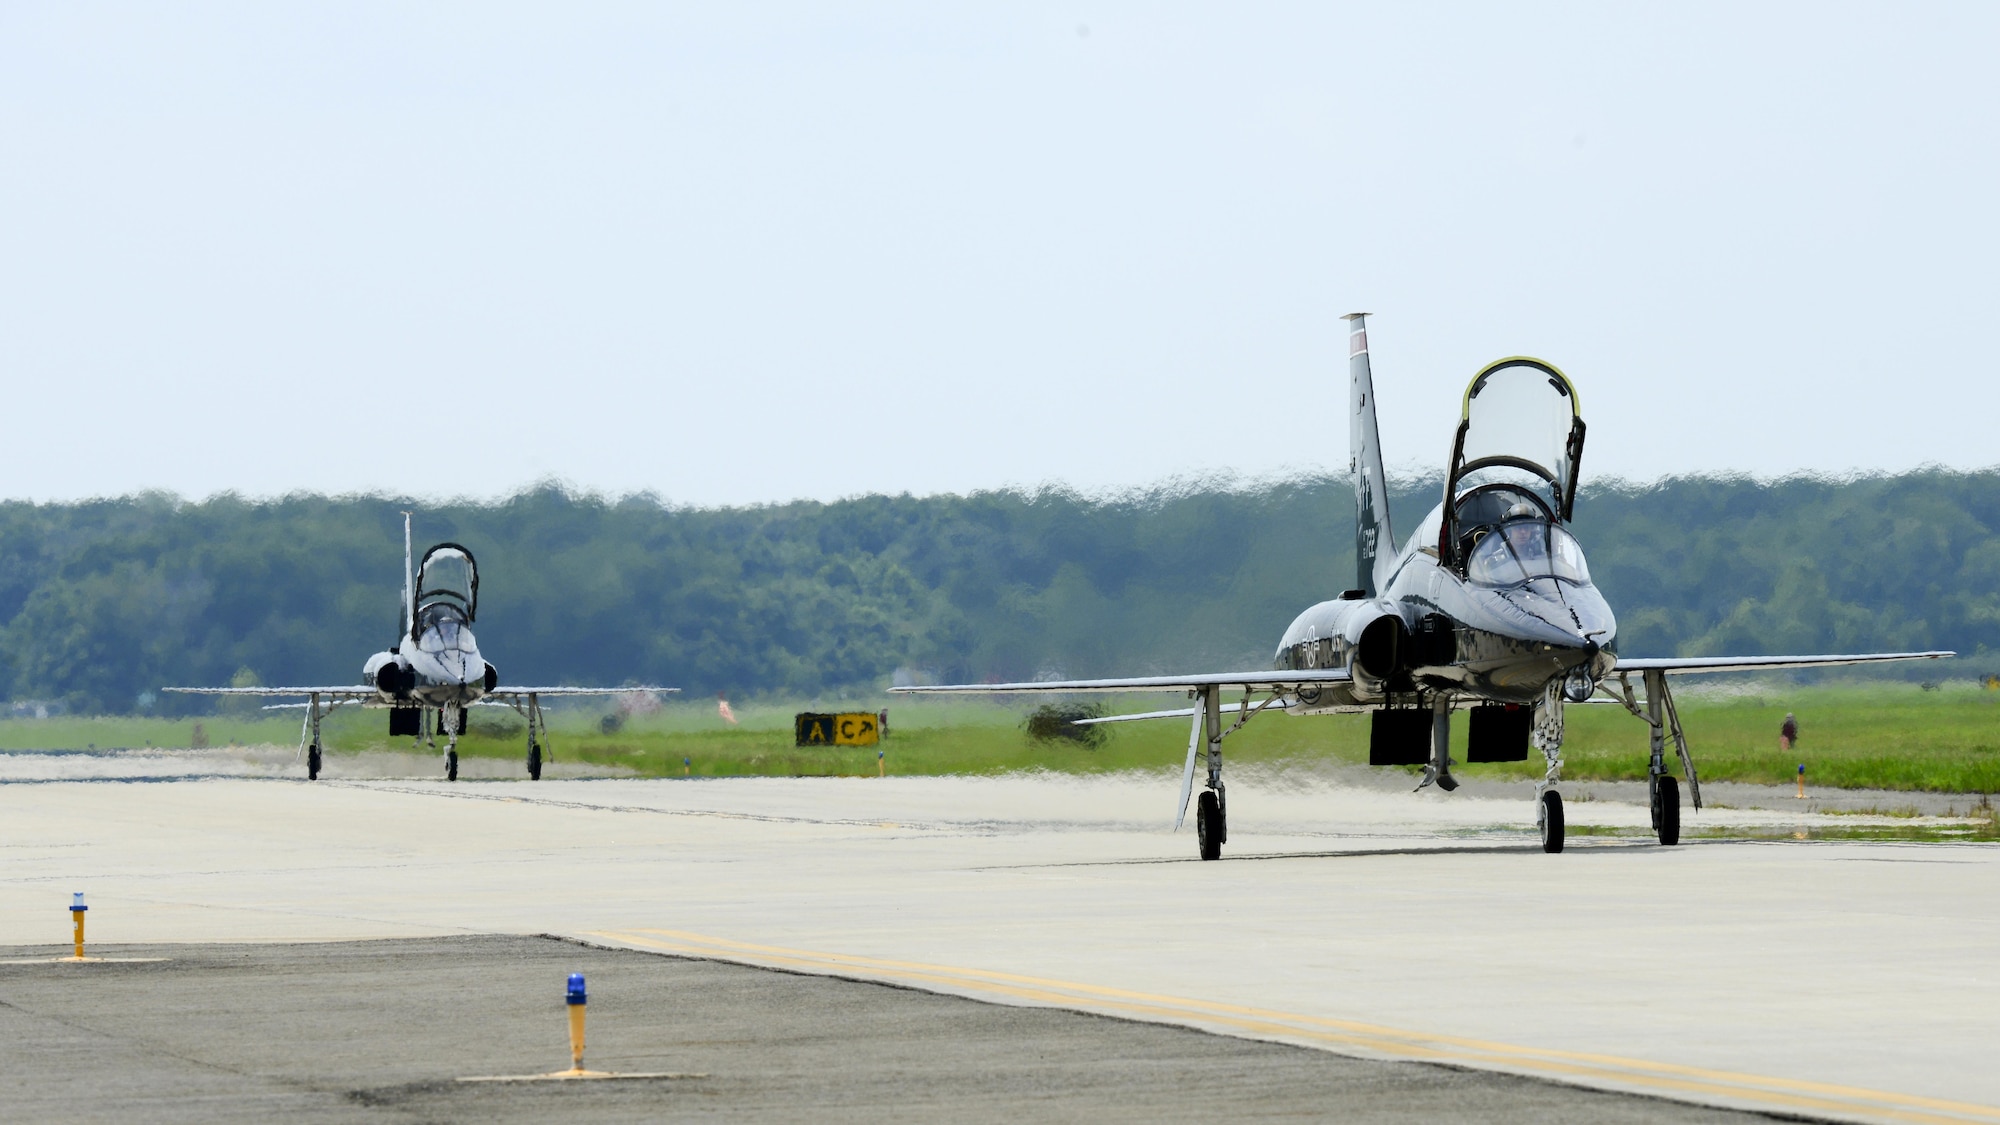 Two U.S. Air Force T-38 Talons taxi on the flight line at Langley Air Force Base, Va., following a 95th Anniversary Maj. Gen. William “Billy” Mitchell memorial reenactment, July 22, 2016. Seven fighter wings, eight airframes and 33 aircrews from across the Air Force gathered to celebrate the 95th anniversary of the 1921 airpower trials. (U.S. Air Force photo by Staff Sgt. R. Alex Durbin)